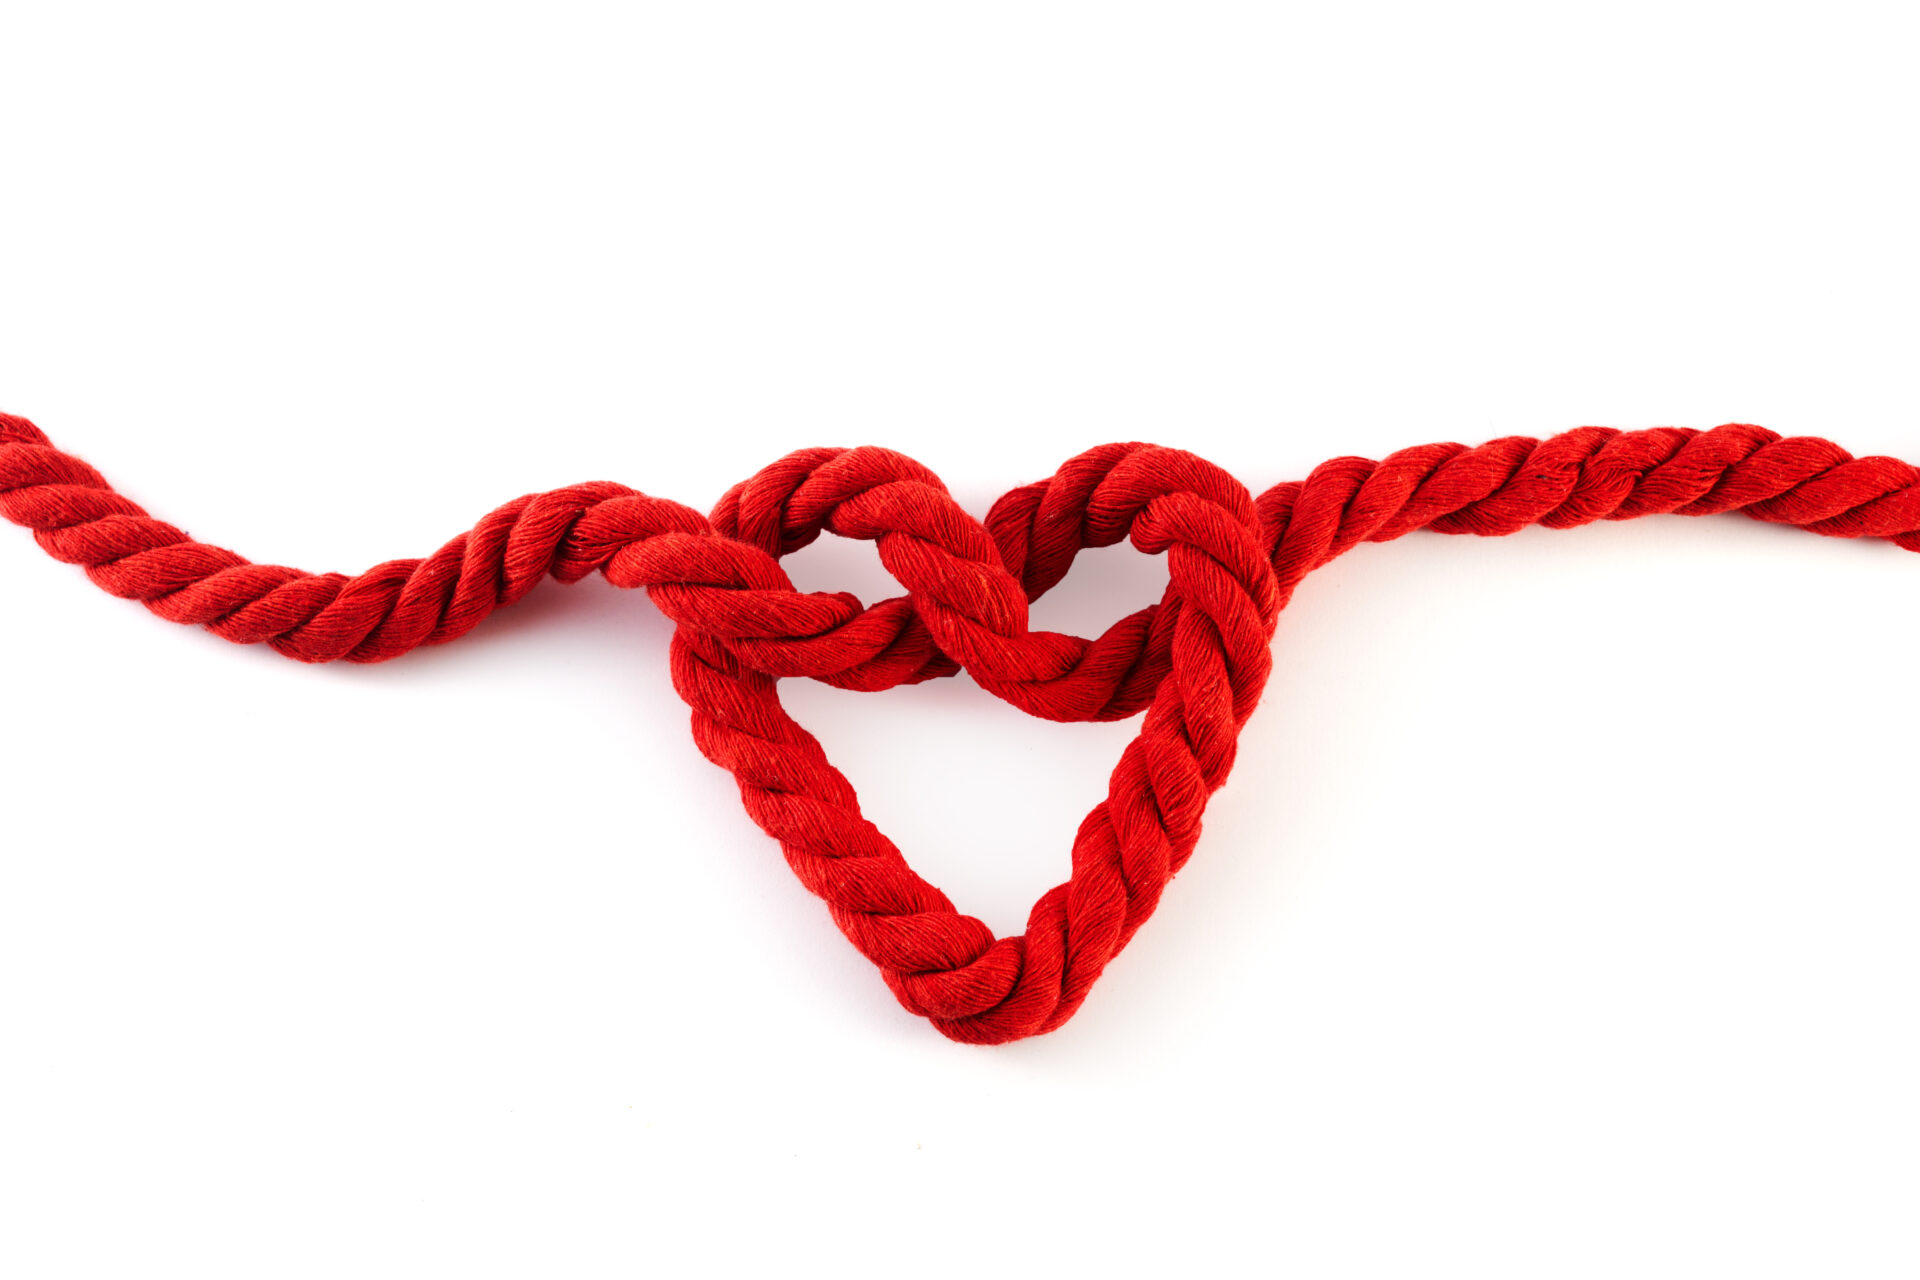 Red rope with a heart shaped knot isolated on white background to represent ligatures being used as a form of self-harm.